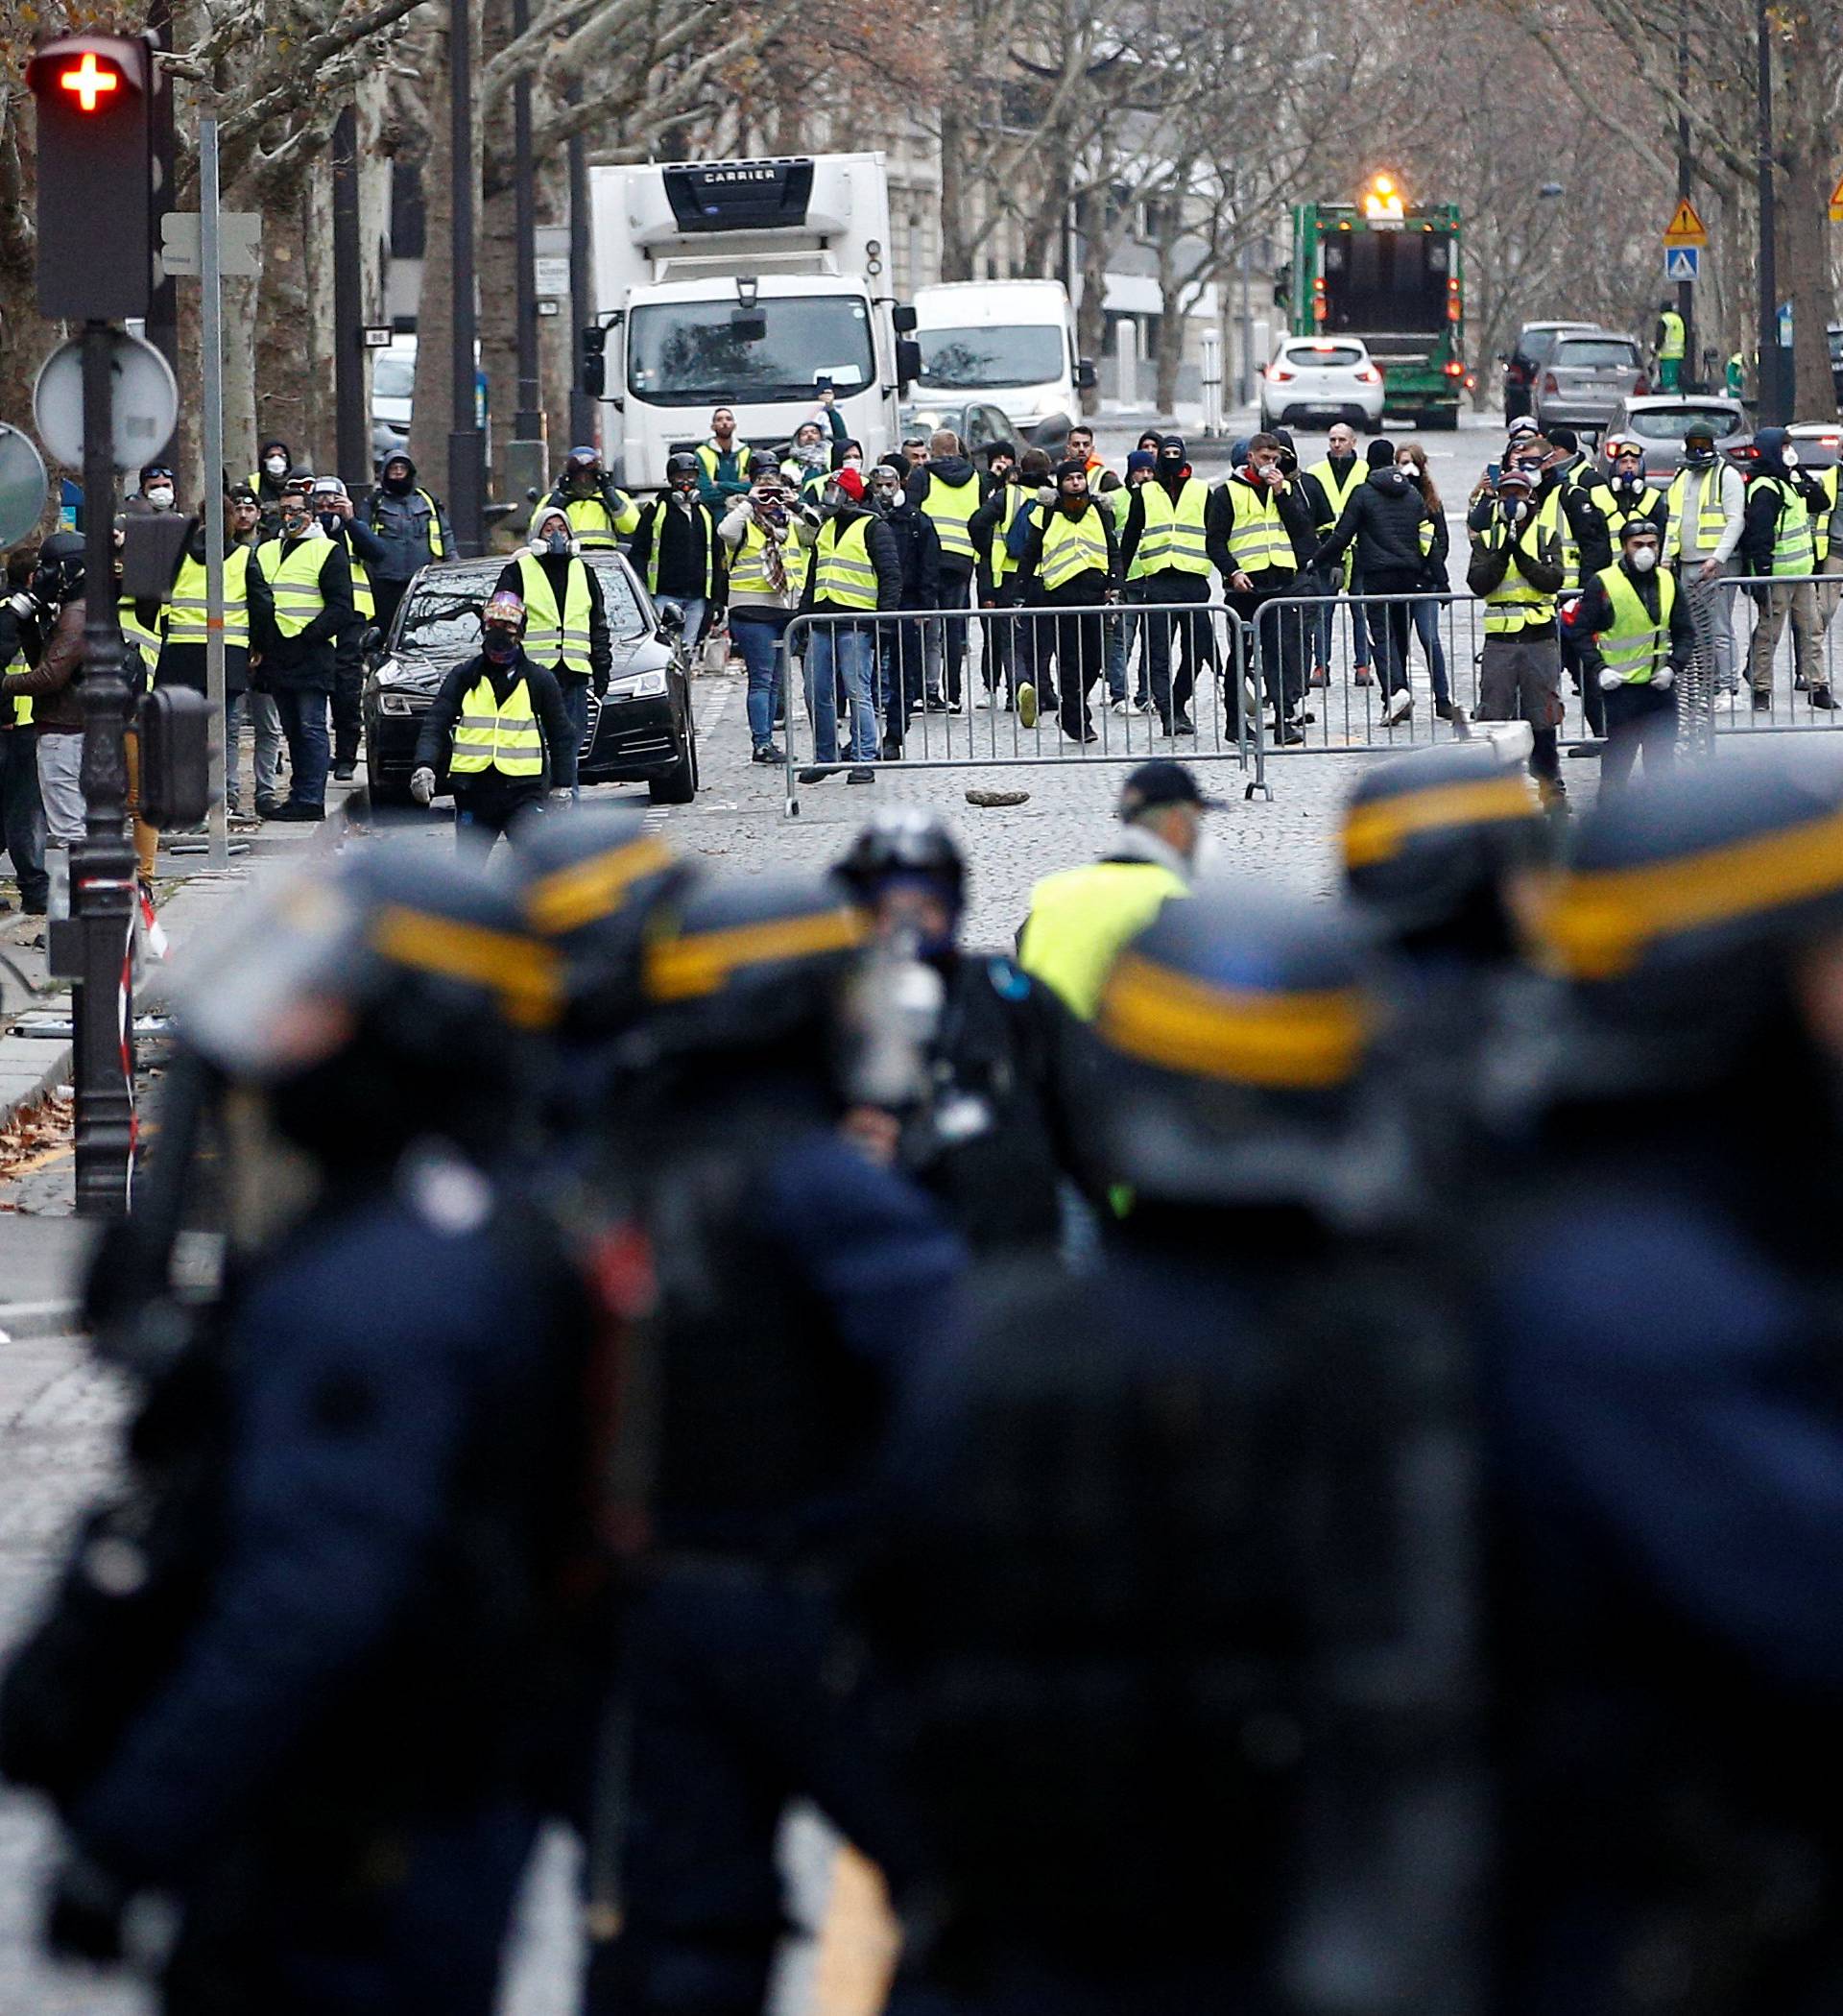 Police secure an area near protesters wearing yellow vests, a symbol of a French drivers' protest against higher diesel taxes, who gathter to demonstrate in Paris